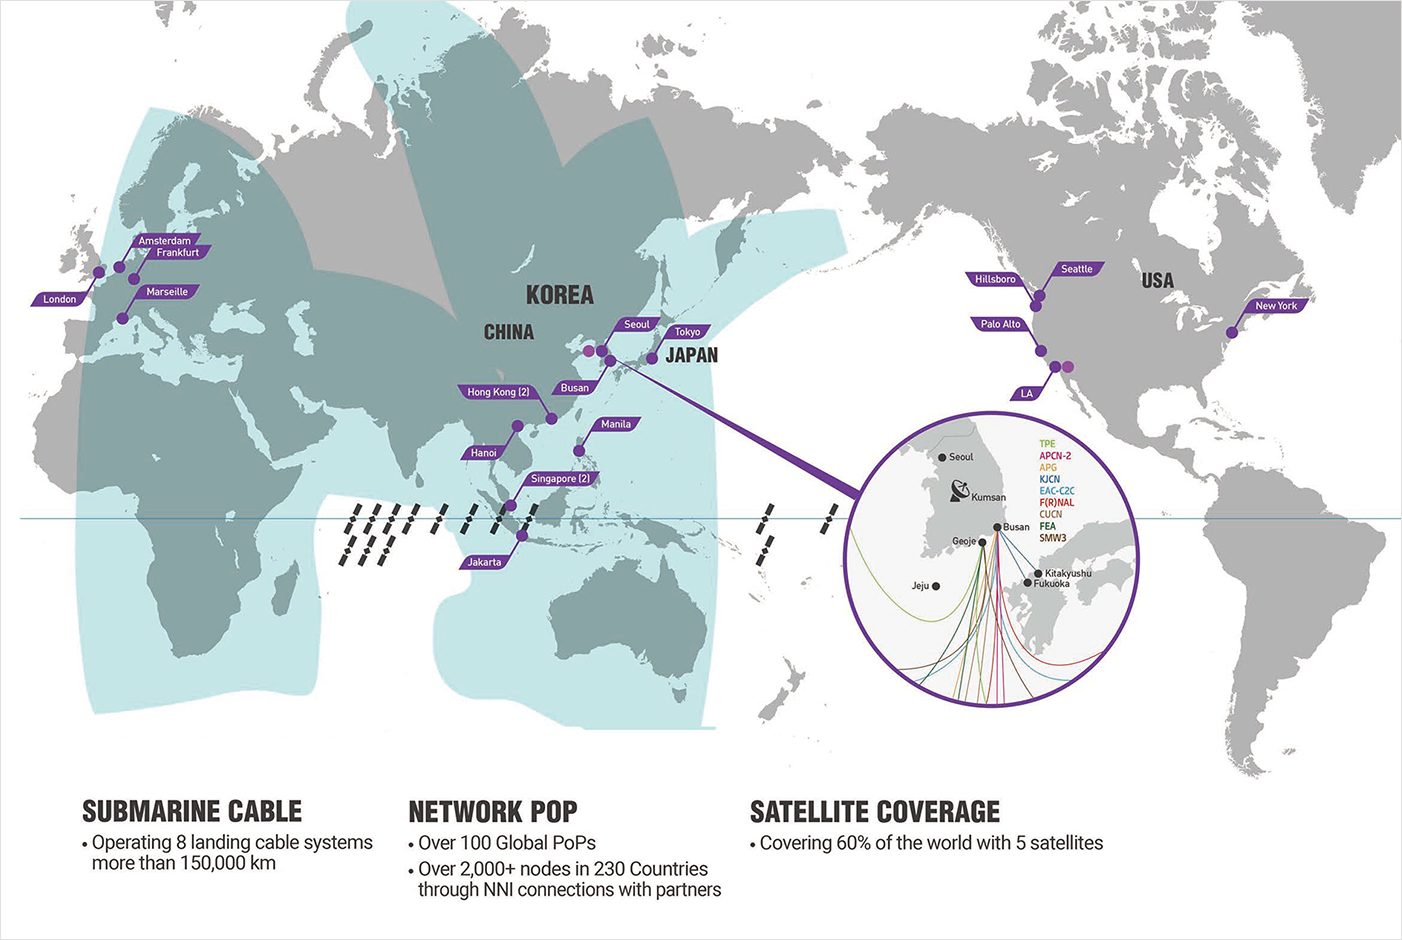 SUBMARINE CABLE: Operating 8 landing cable systems more than 150,000 km / NETWORK POP: Over 100 Global PoPs, Over 2,000+ nodes in 230 Countries through NNI connections with partners / SATELLITE COVERAGE: Covering 60% of the world with 5 satellites